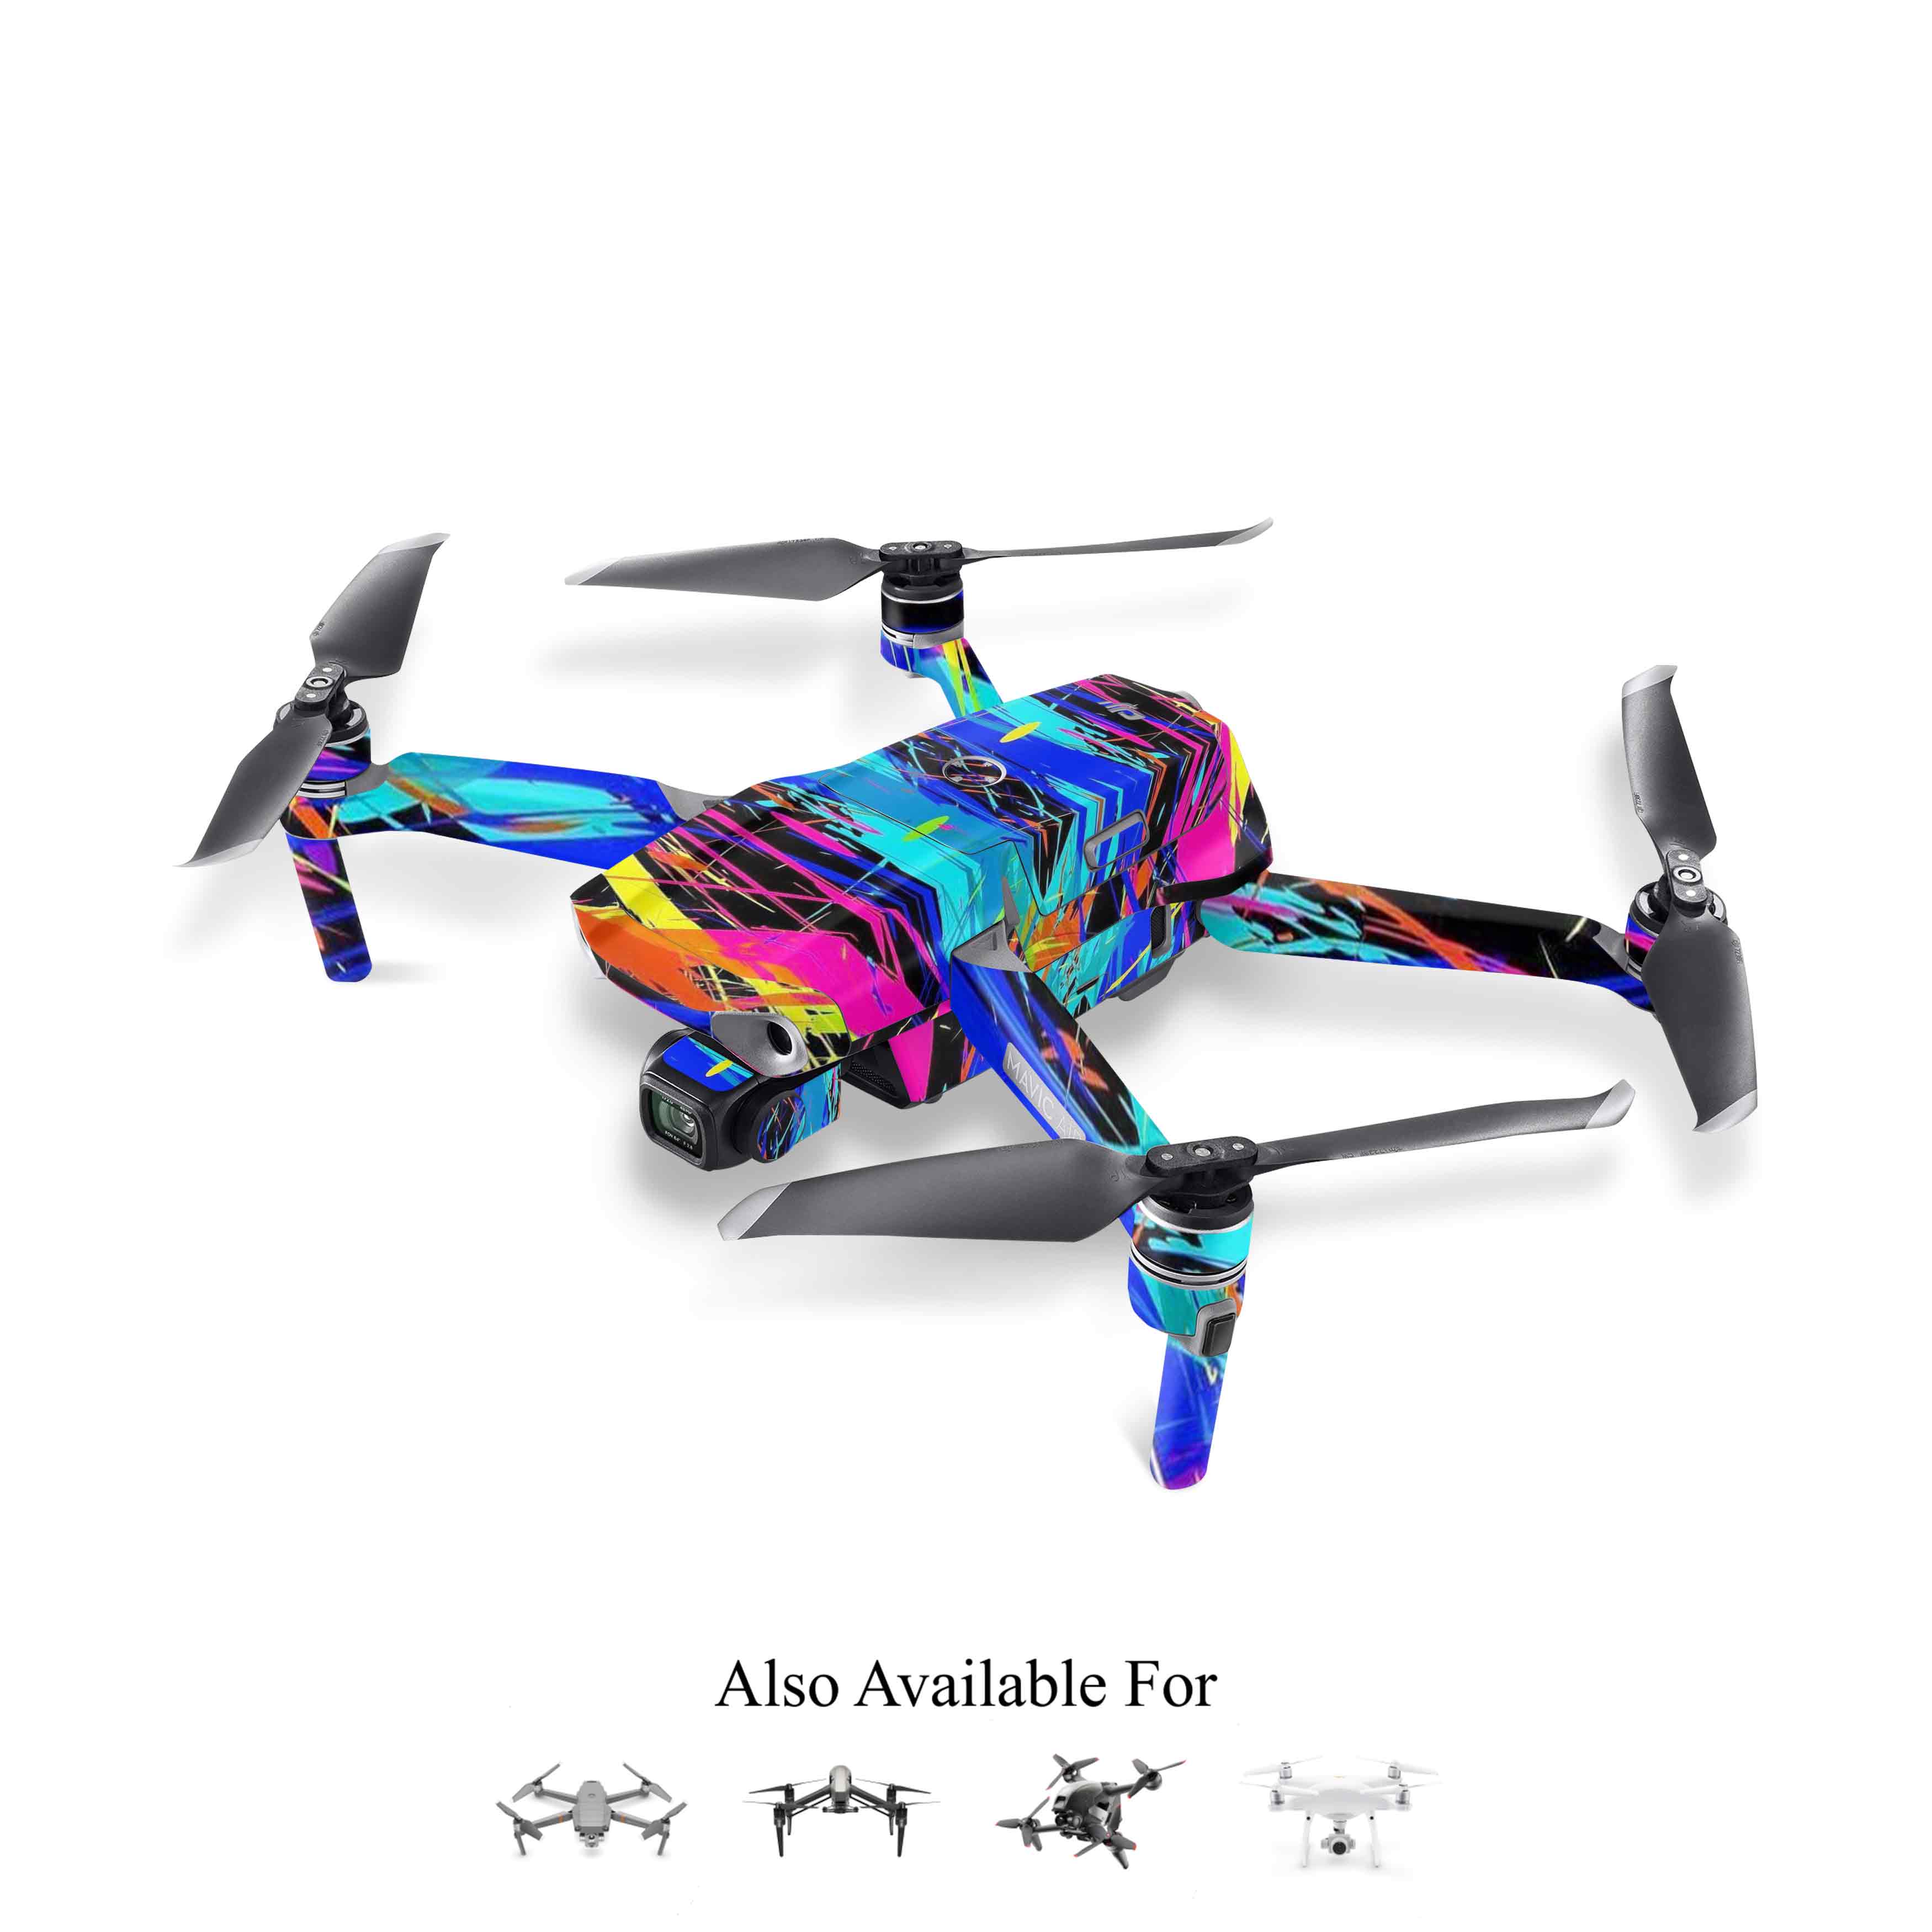 Expand your style with custom Drone skins. Printed drone stickers and camera skins with water resistant technology. Buy these vinly drone wraps from WrapCart.